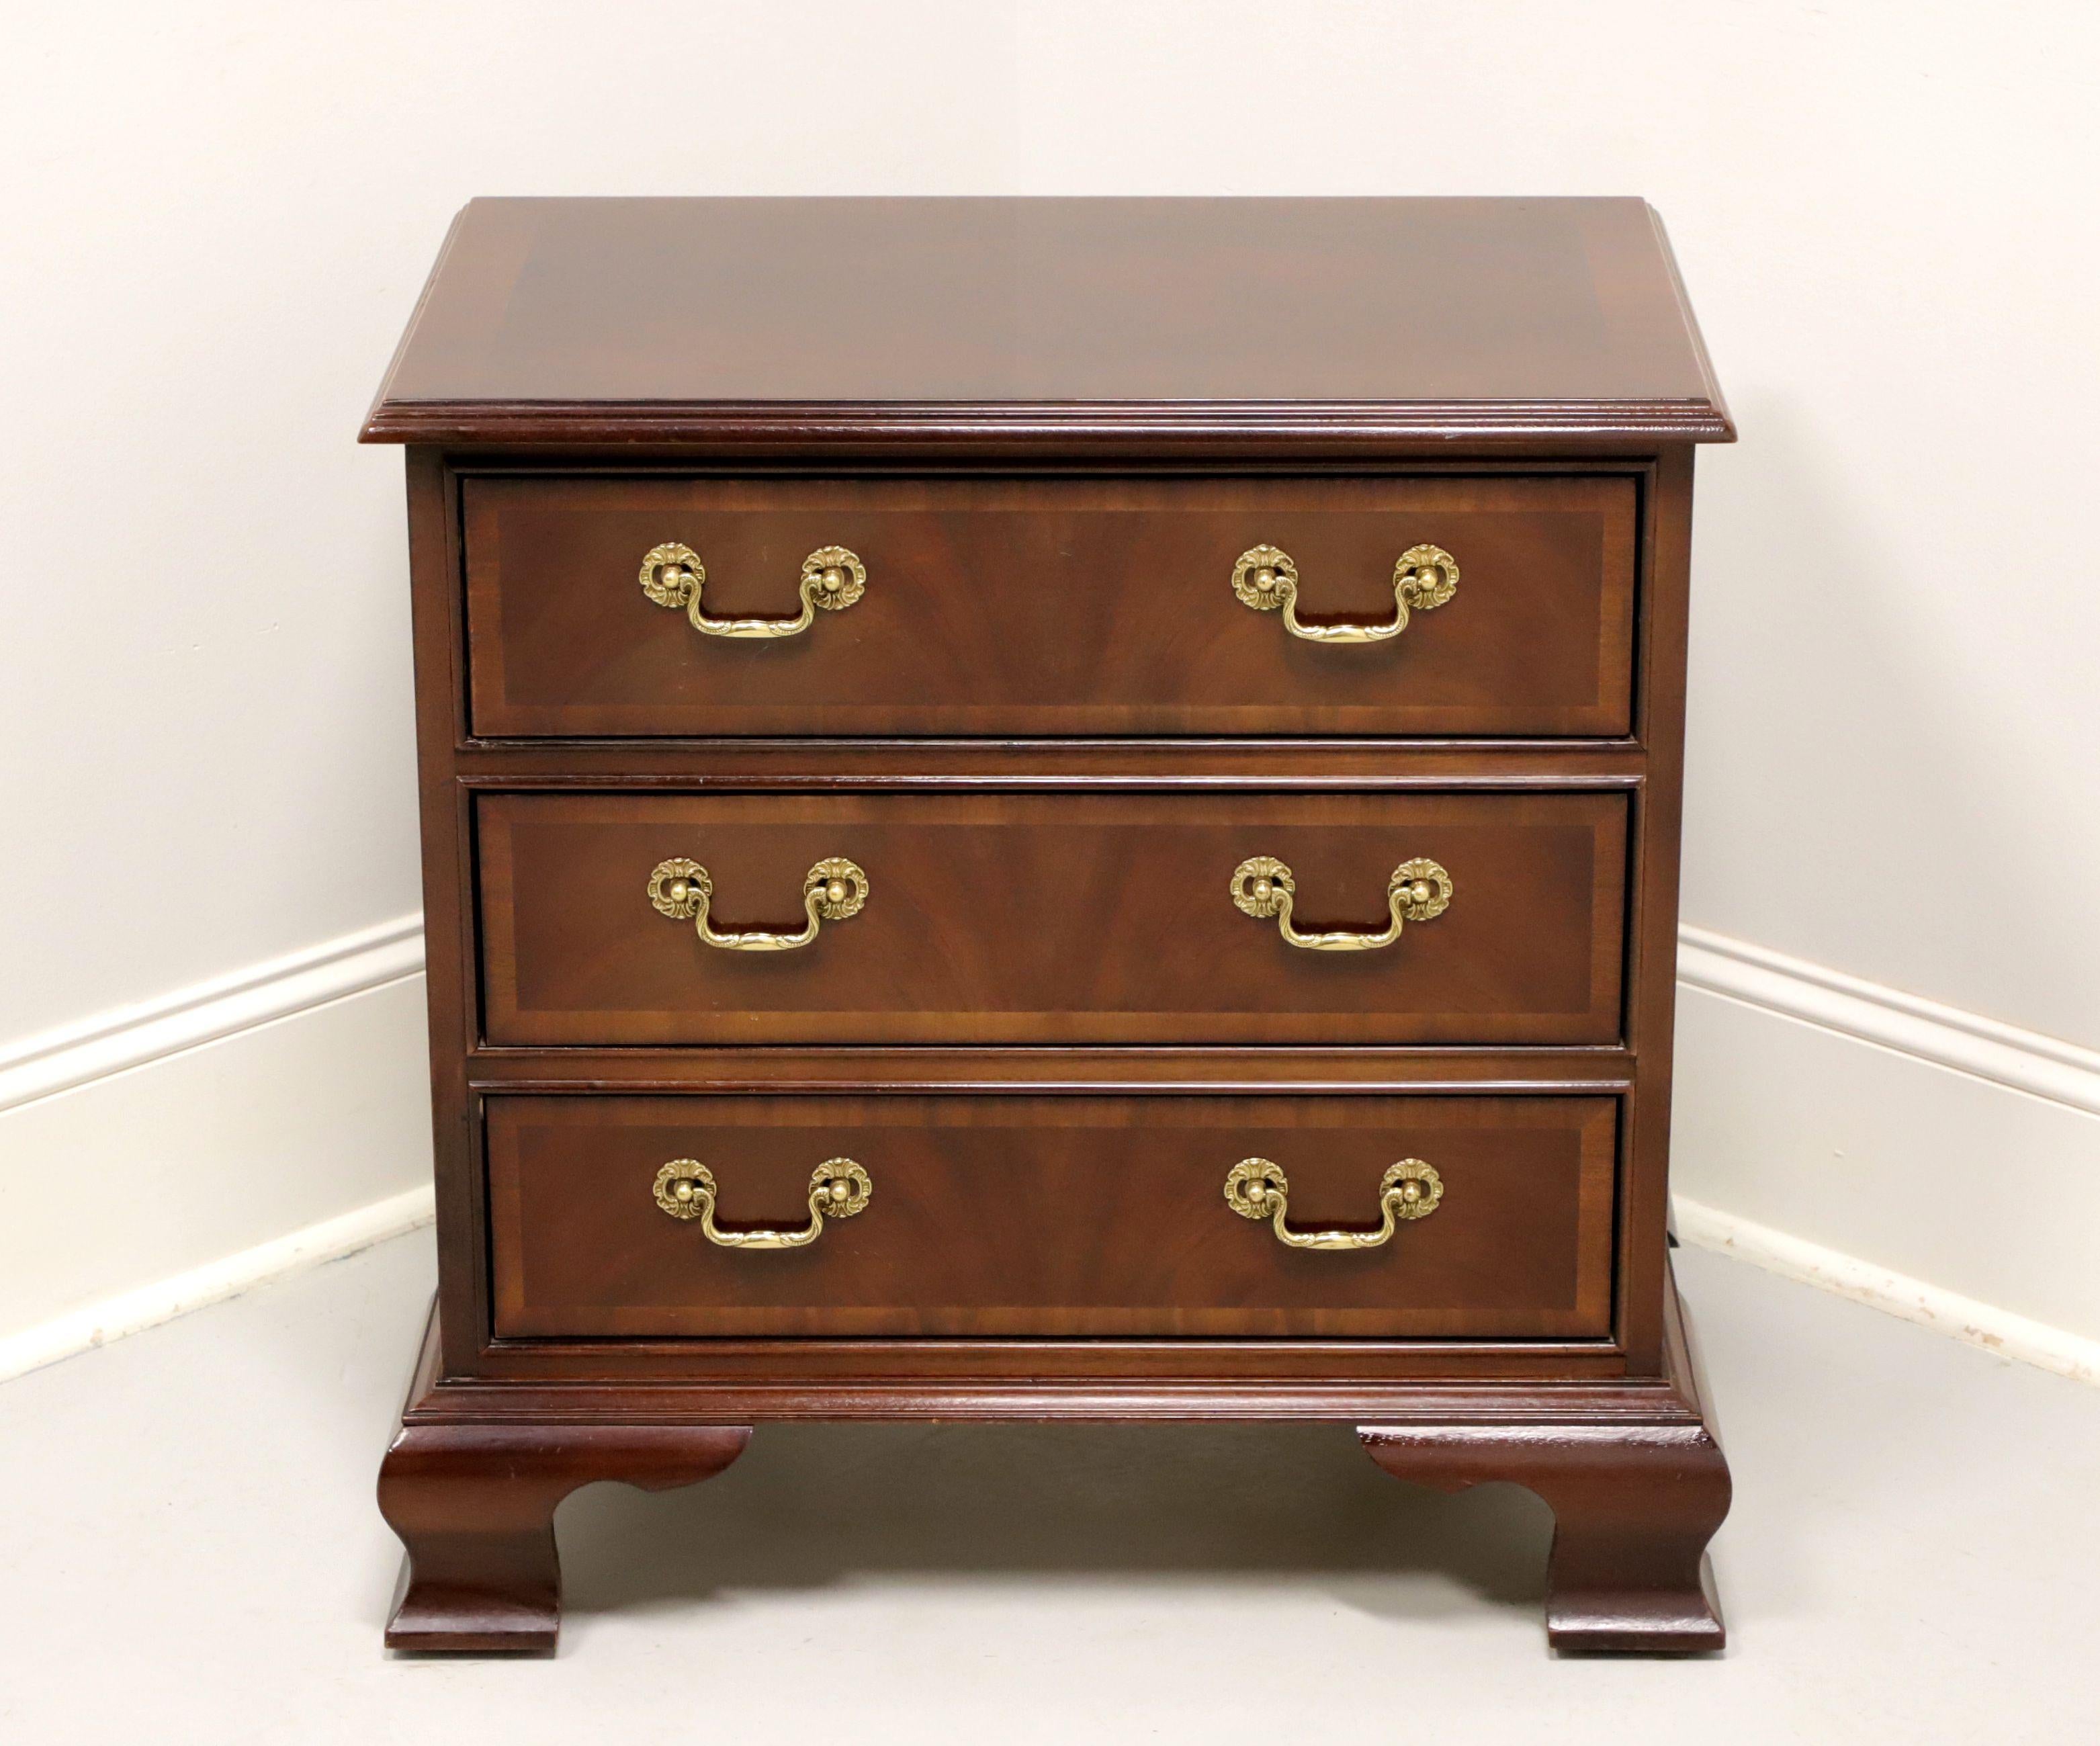 A Chippendale style chairside chest by Bernhardt, from their Centennial Collection. Mahogany, inlaid banded top with an ogee edge, brass drawer hardware & side handles, inlaid banded drawer fronts, fully finished back, and ogee bracket feet.